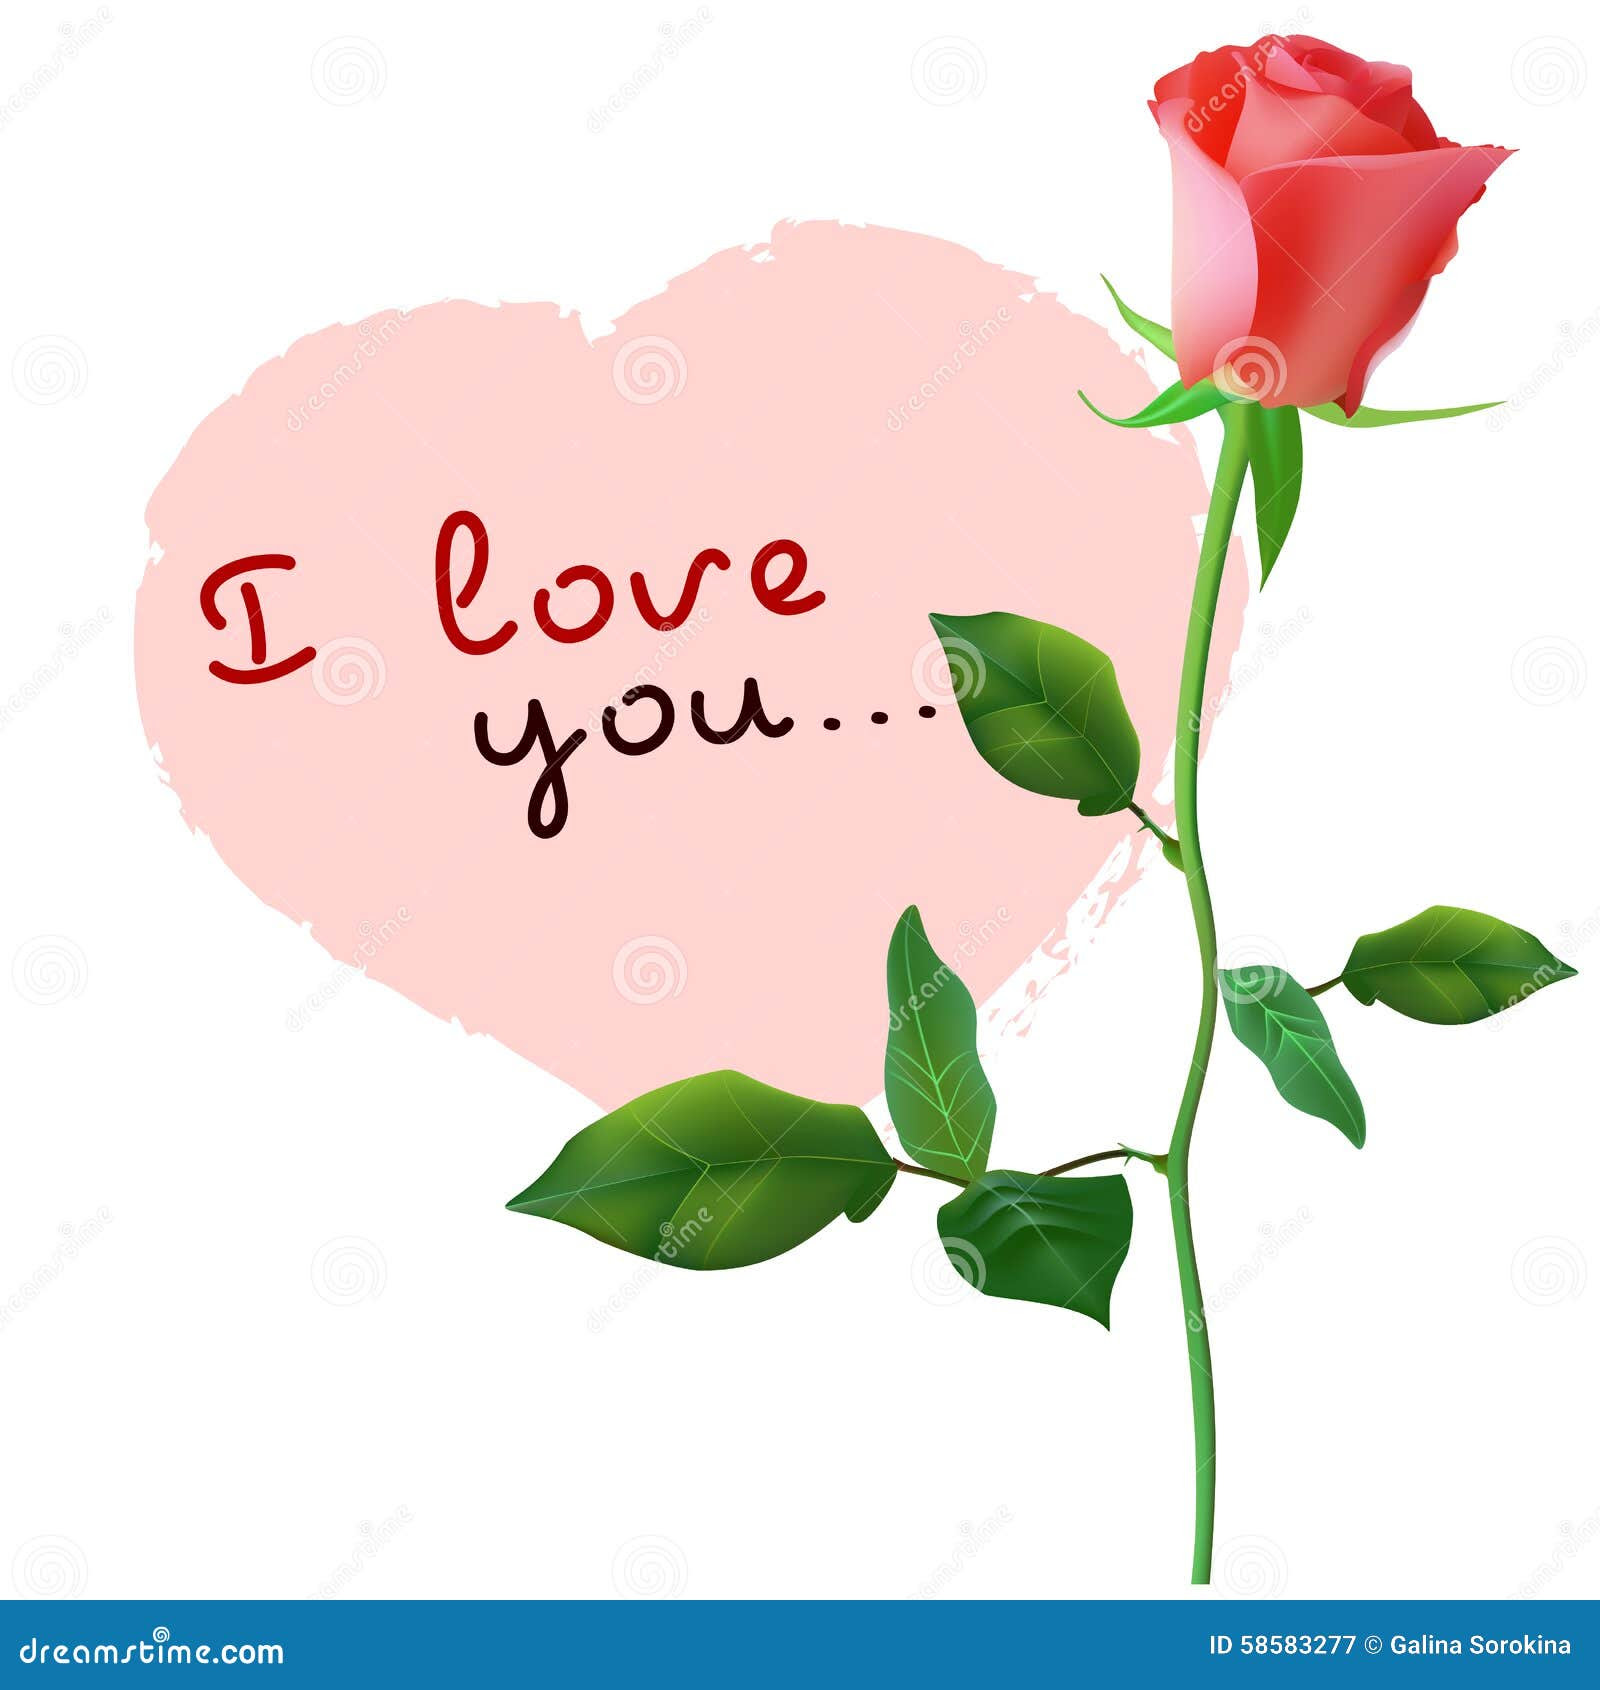 I Love You Red Rose Images Hd